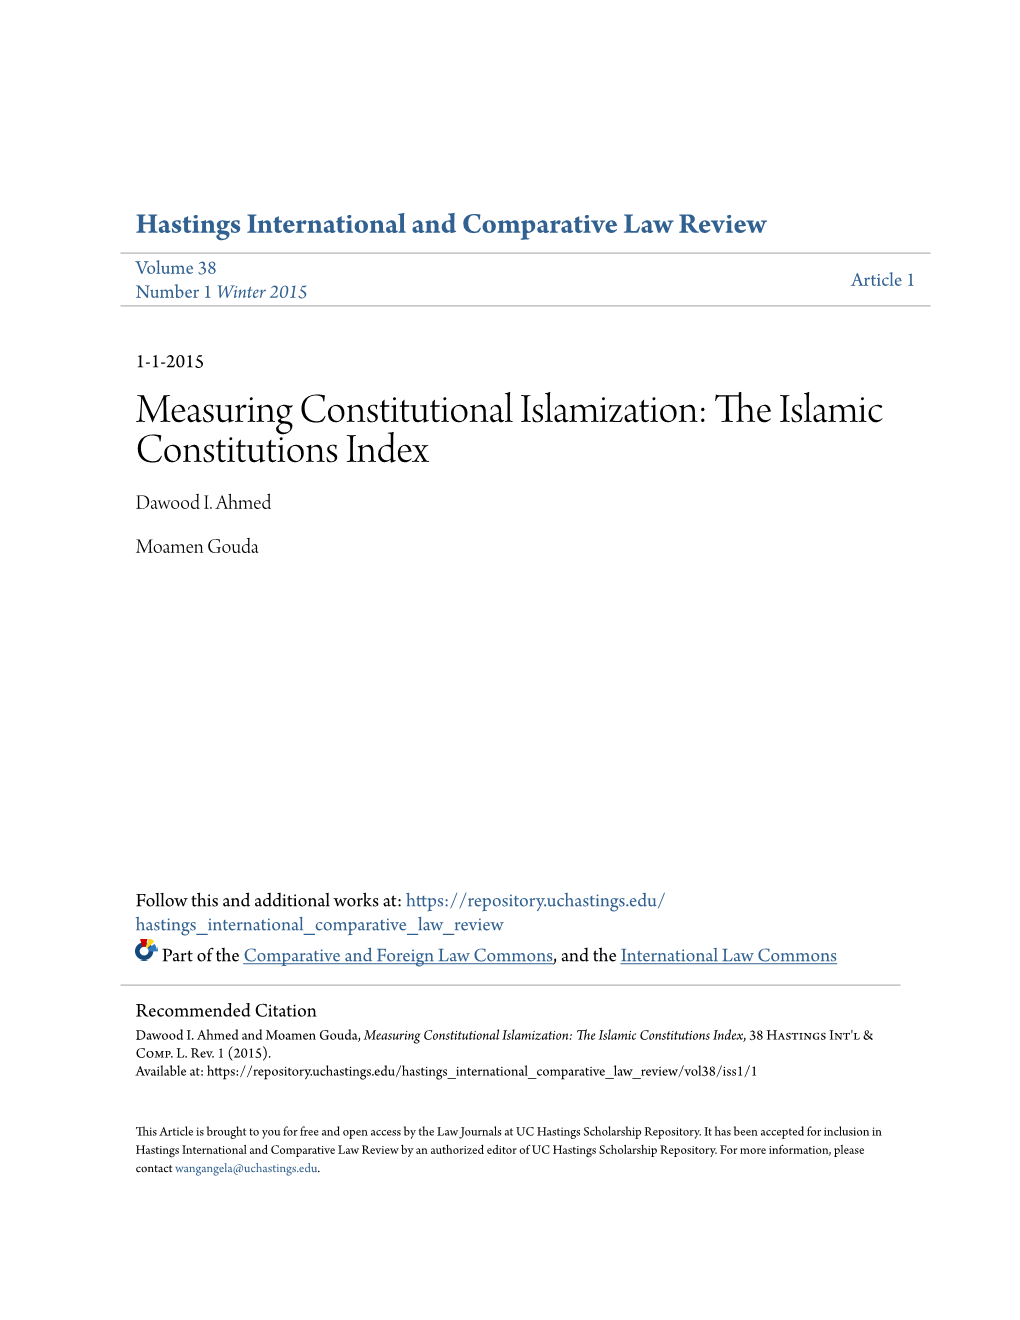 The Islamic Constitutions Index, 38 Hastings Int'l & Comp